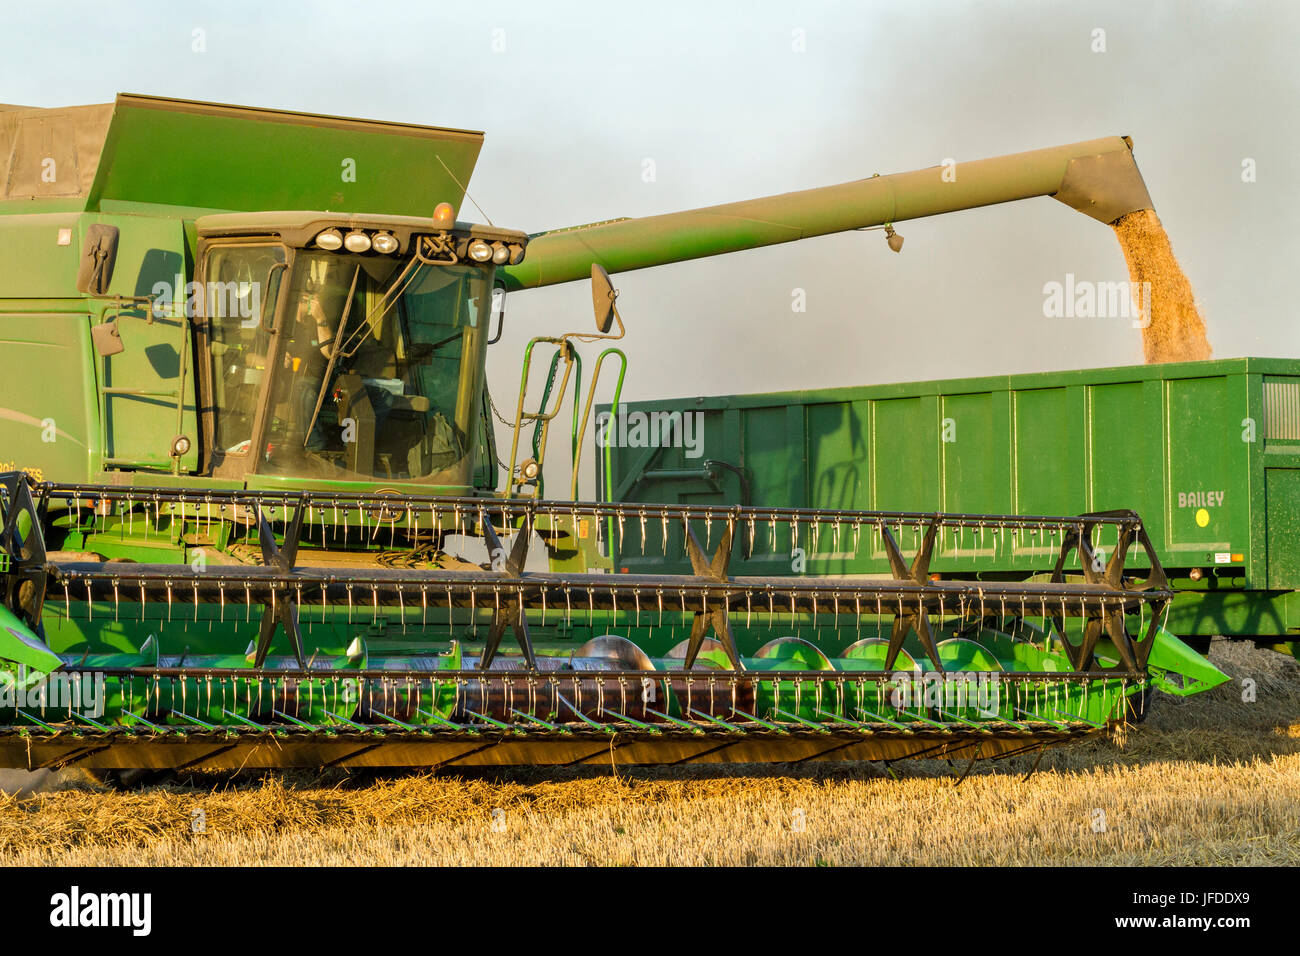 Discharging wheat grain from a combine harvester to a trailer, Nottinghamshire, England, UK Stock Photo